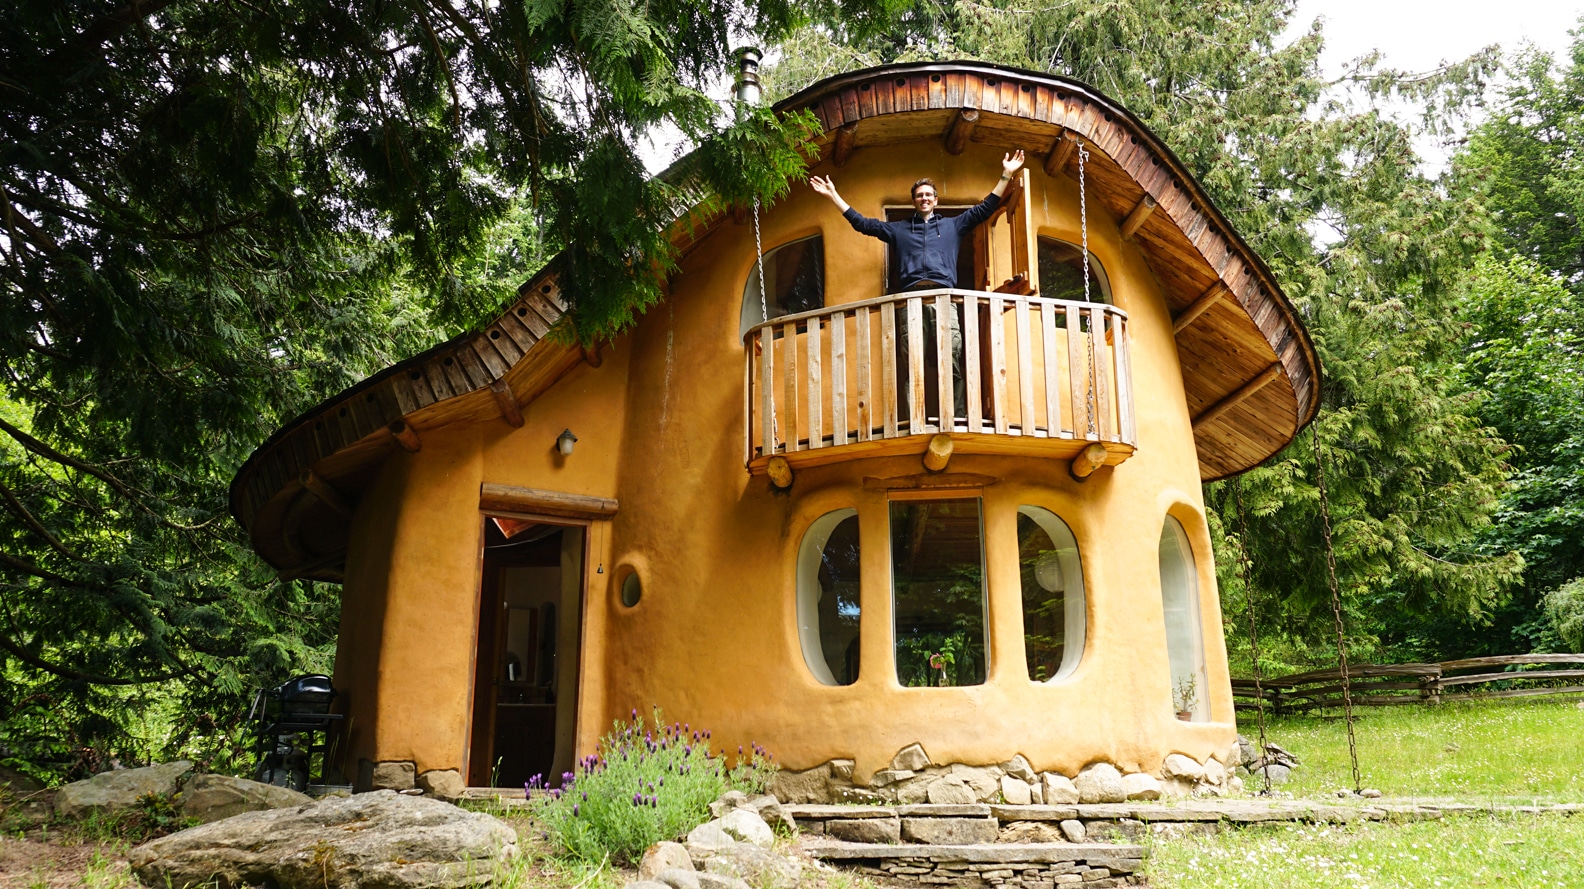 Man With Arms Outstretched Outside of Cob House